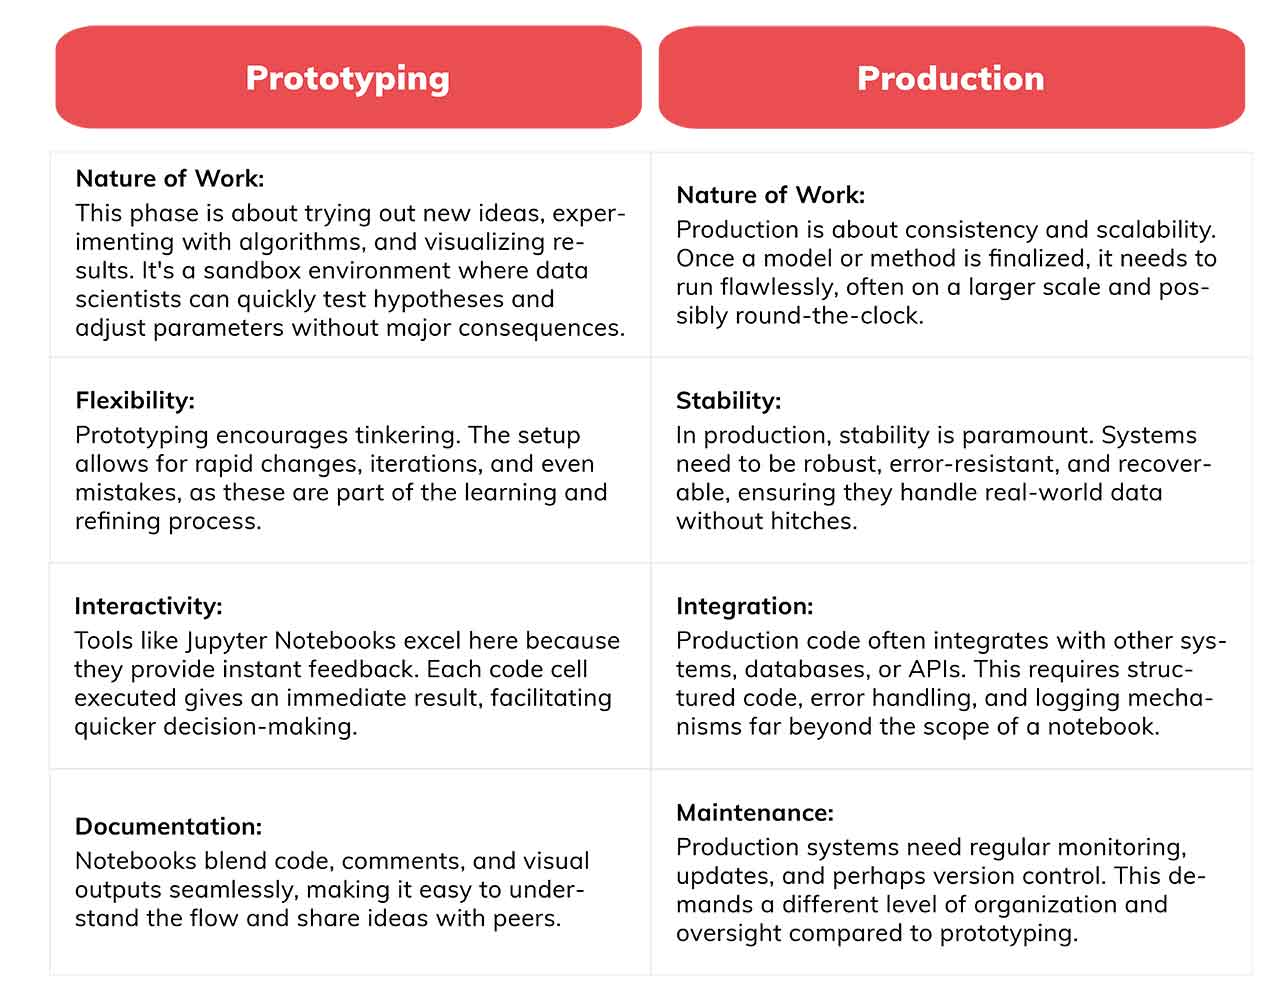 Differences between prototyping environments and production environments.